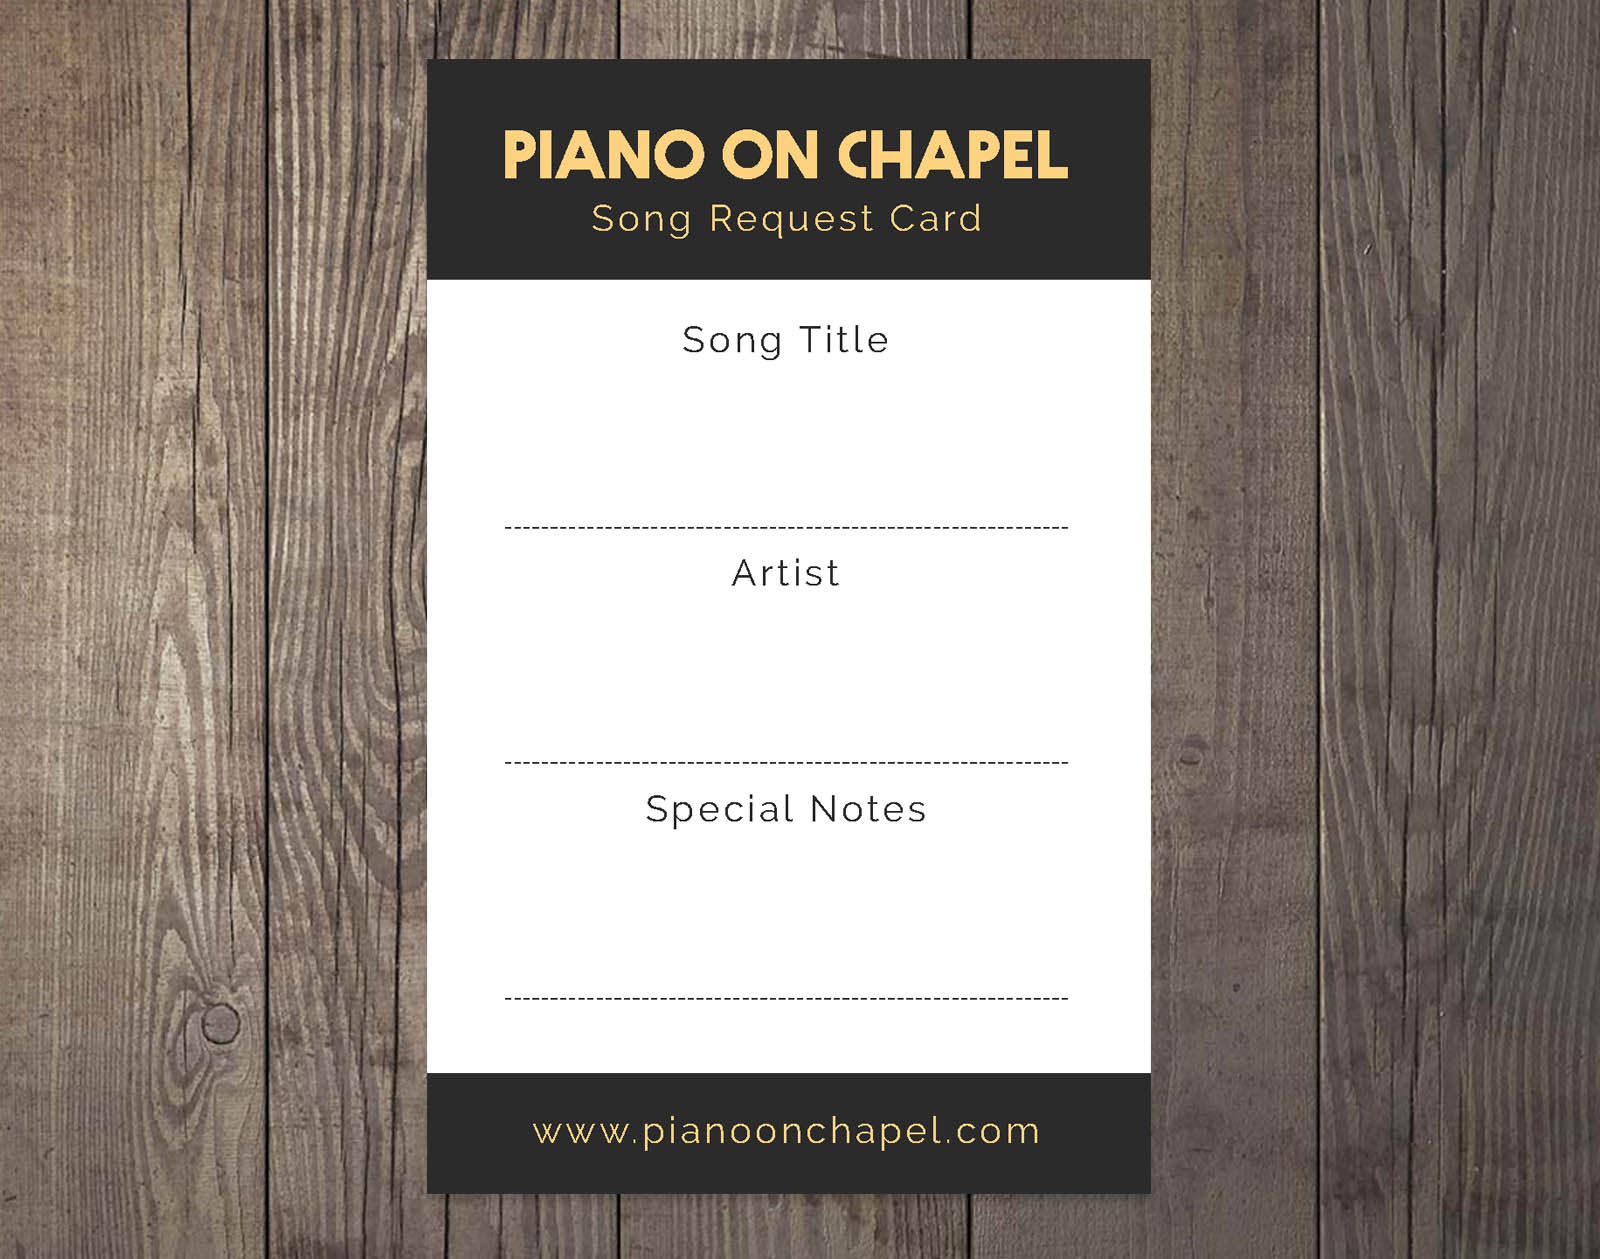 Piano on chapel song booking card